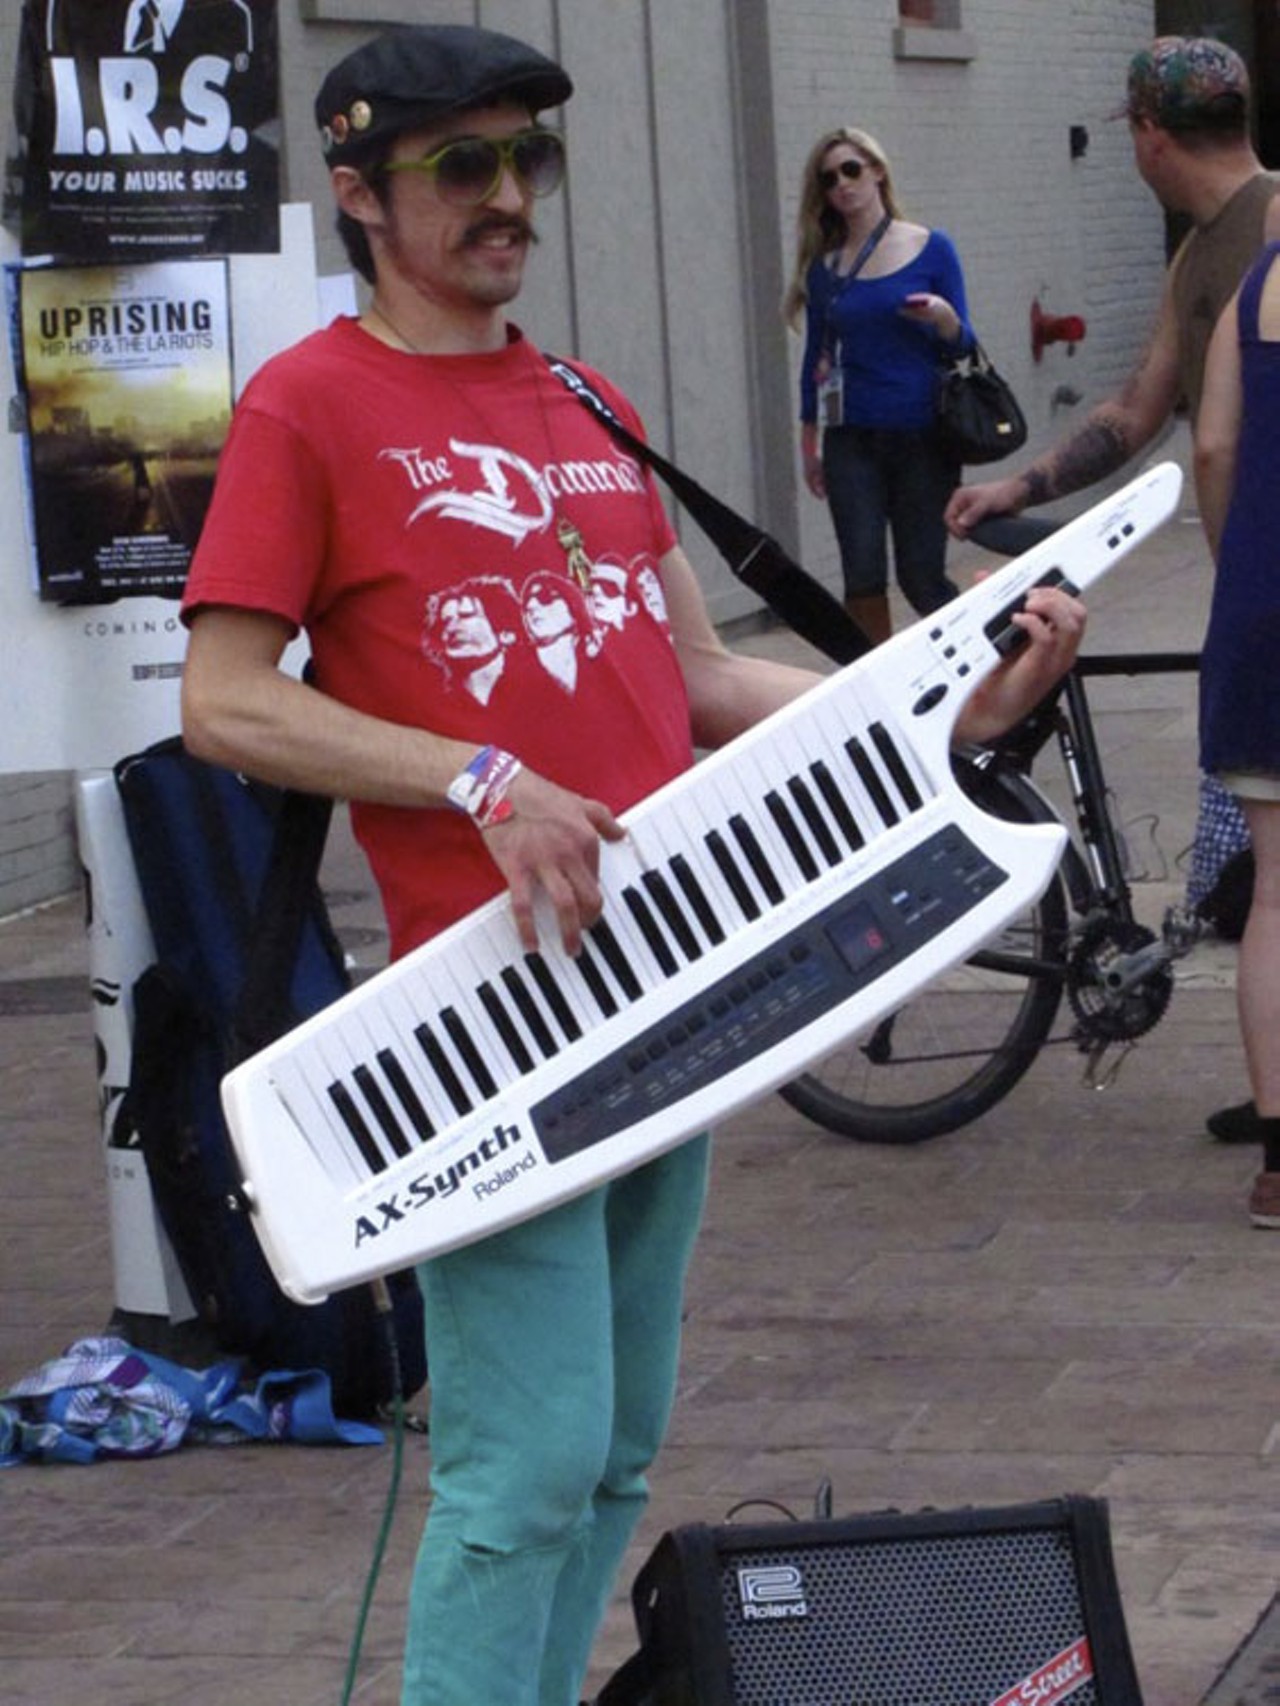 Every good festival needs someone playing a keytar. This man was showing his skills on 6th street.